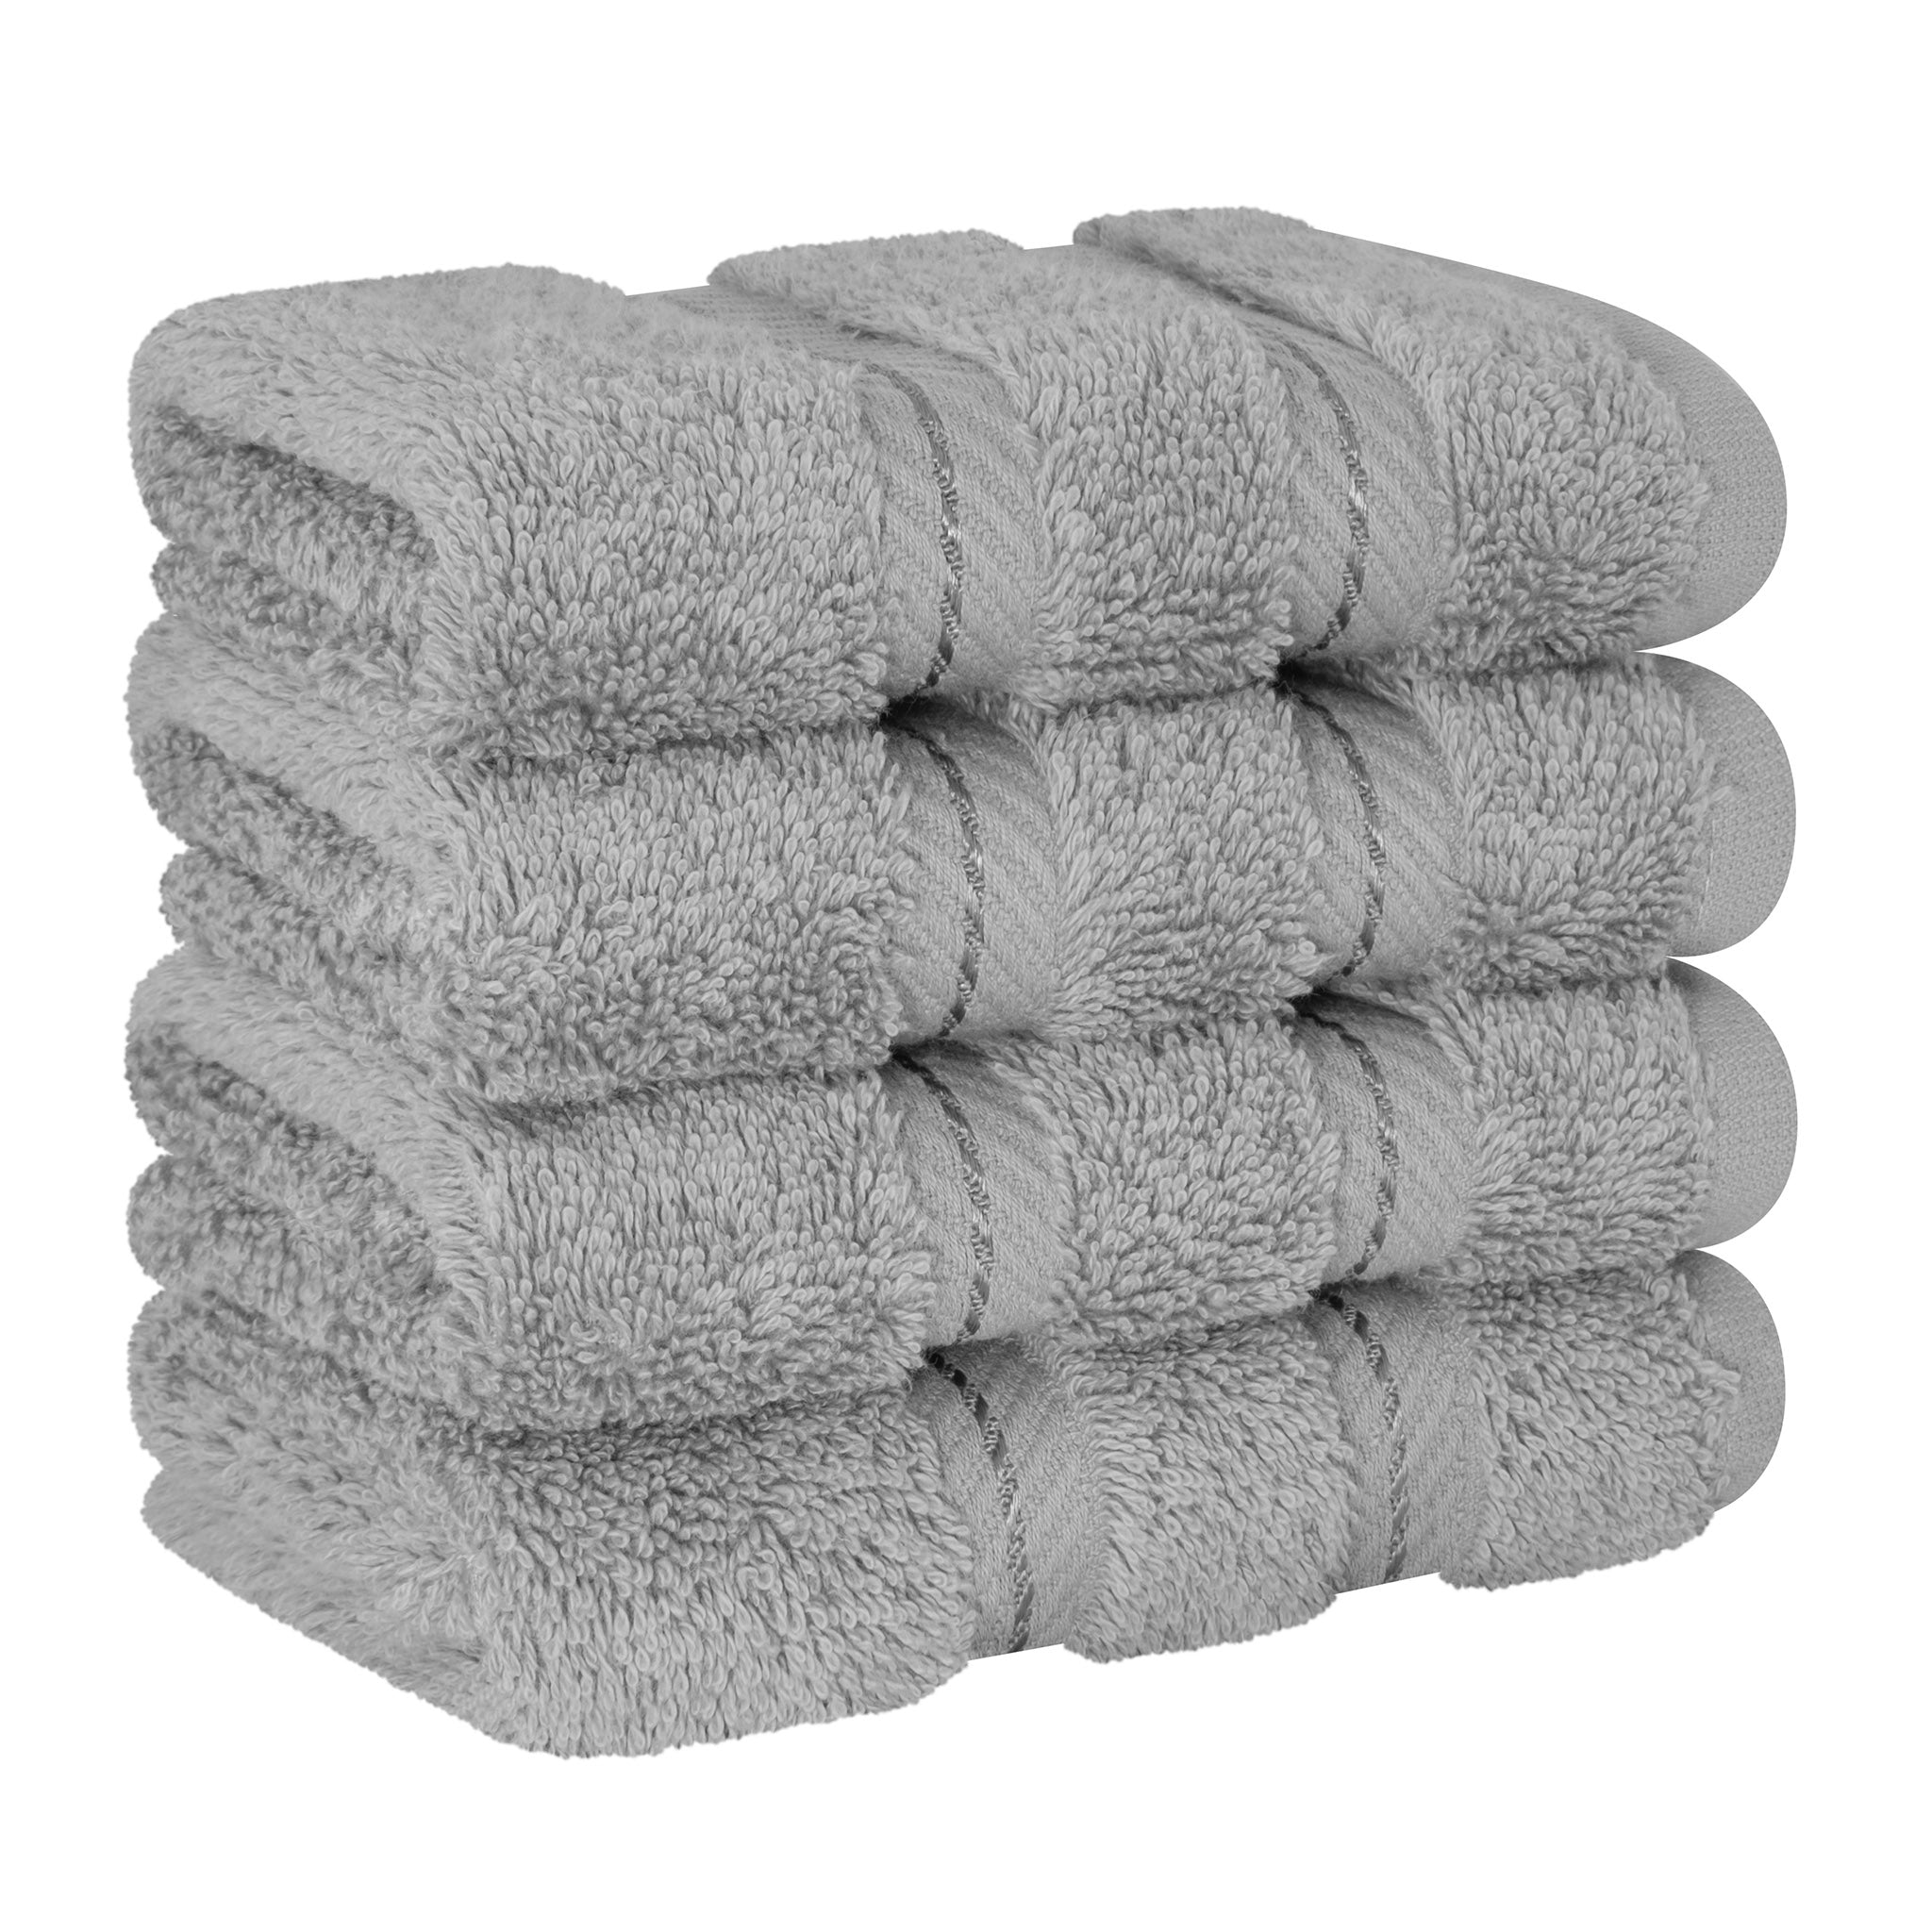 Luxury Turkish Cotton Washcloths for Easy Care, Extra Soft and Absorbent, Fingertip Towels, 4 Pack Washcloth Set by United Home Textile, Charcoal Grey